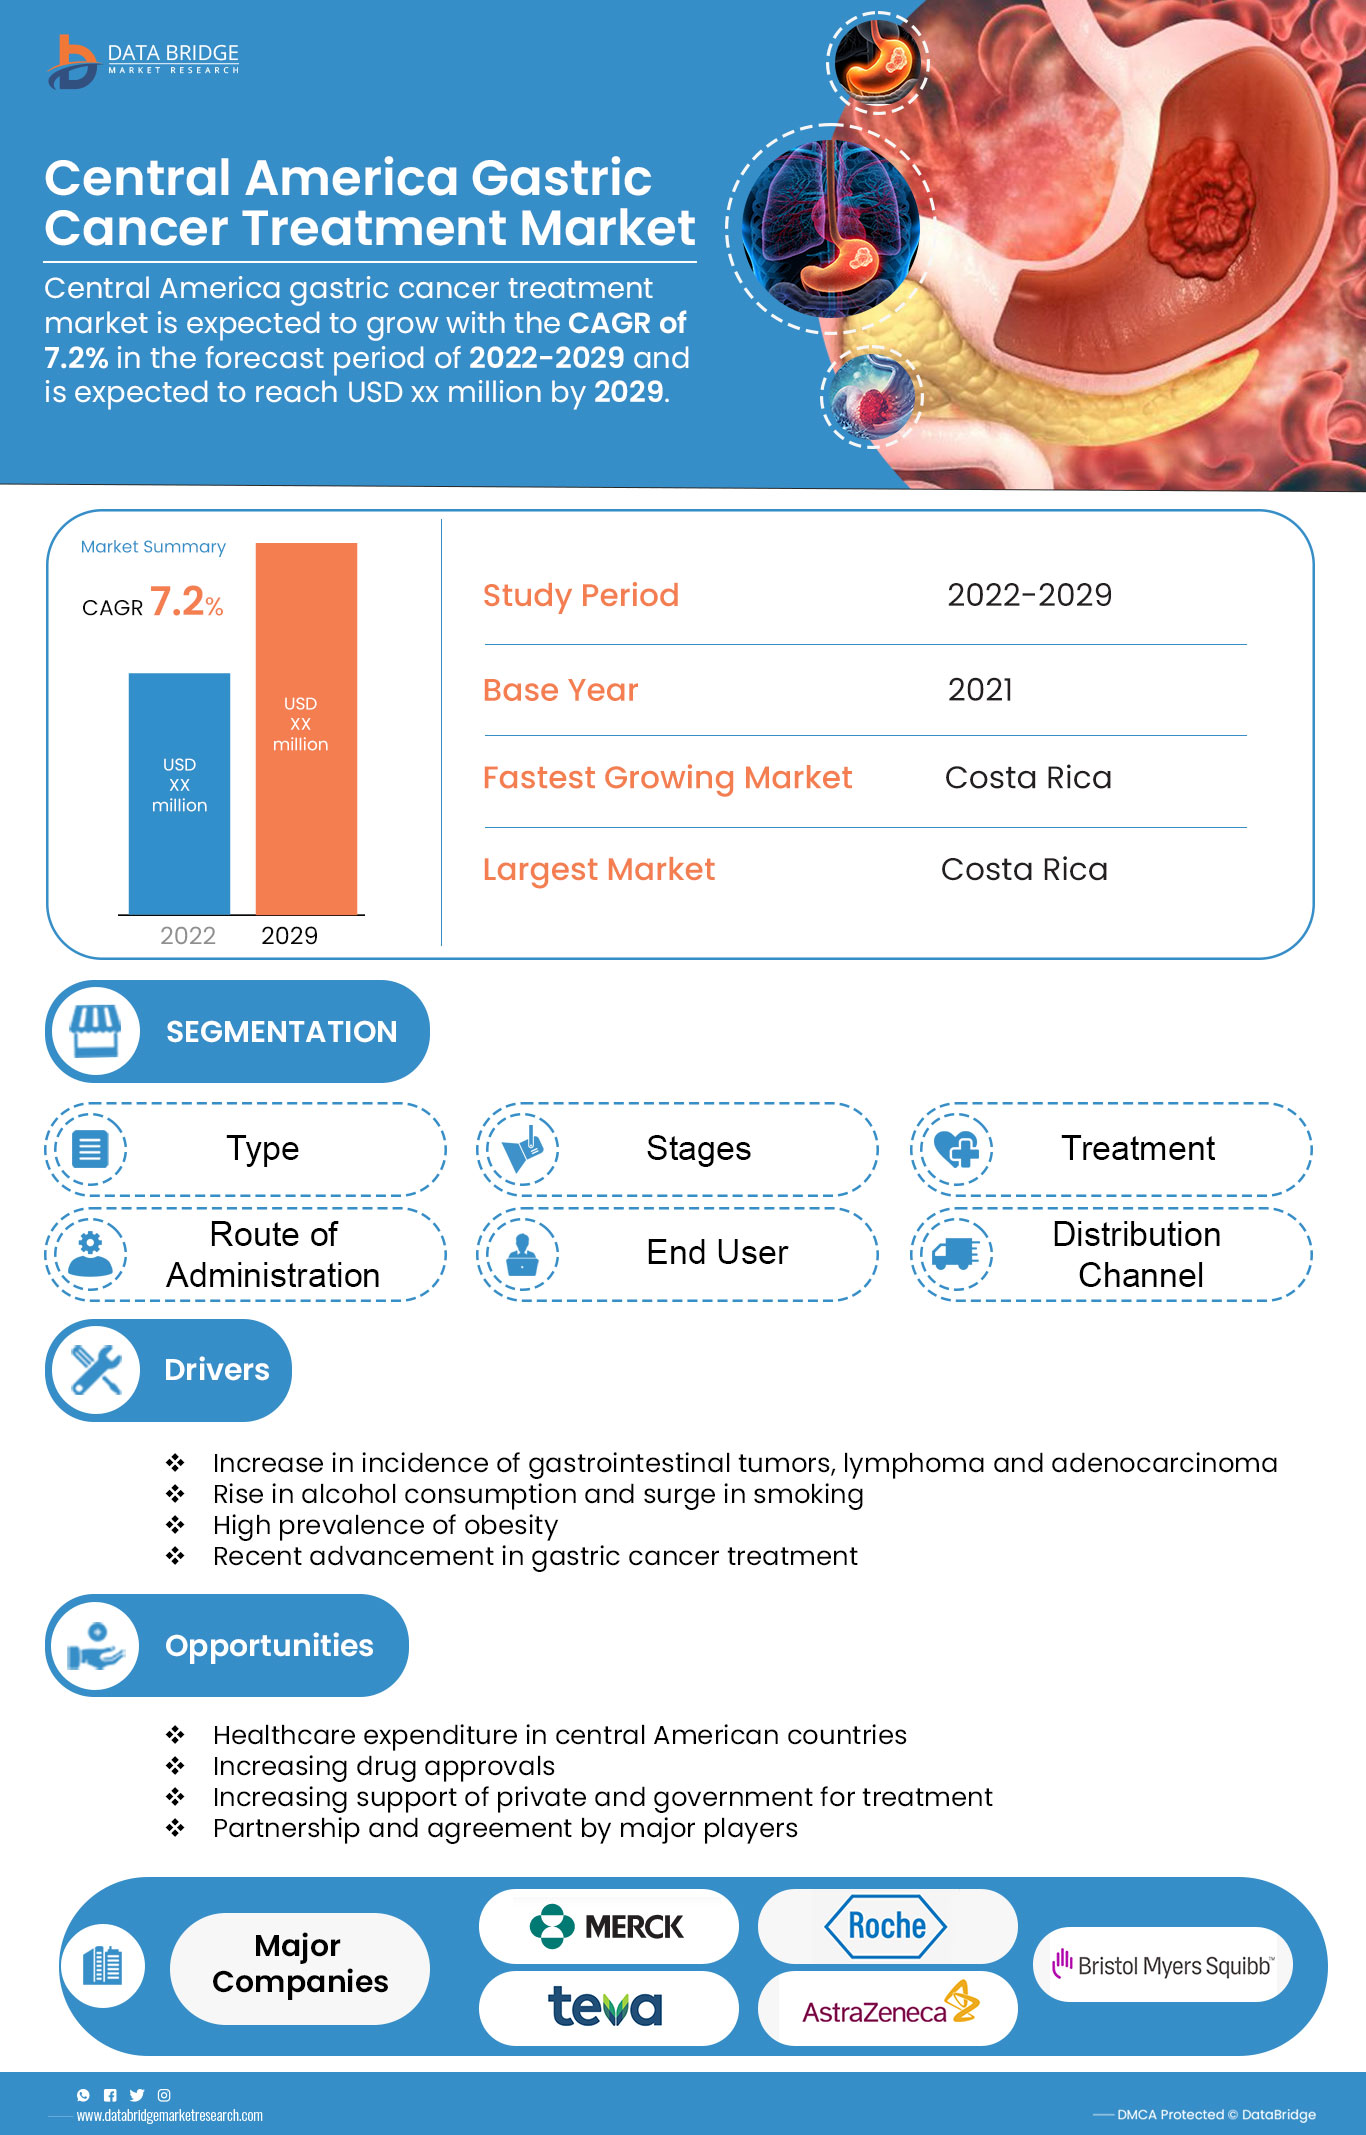 Central America Gastric Cancer Treatment Market